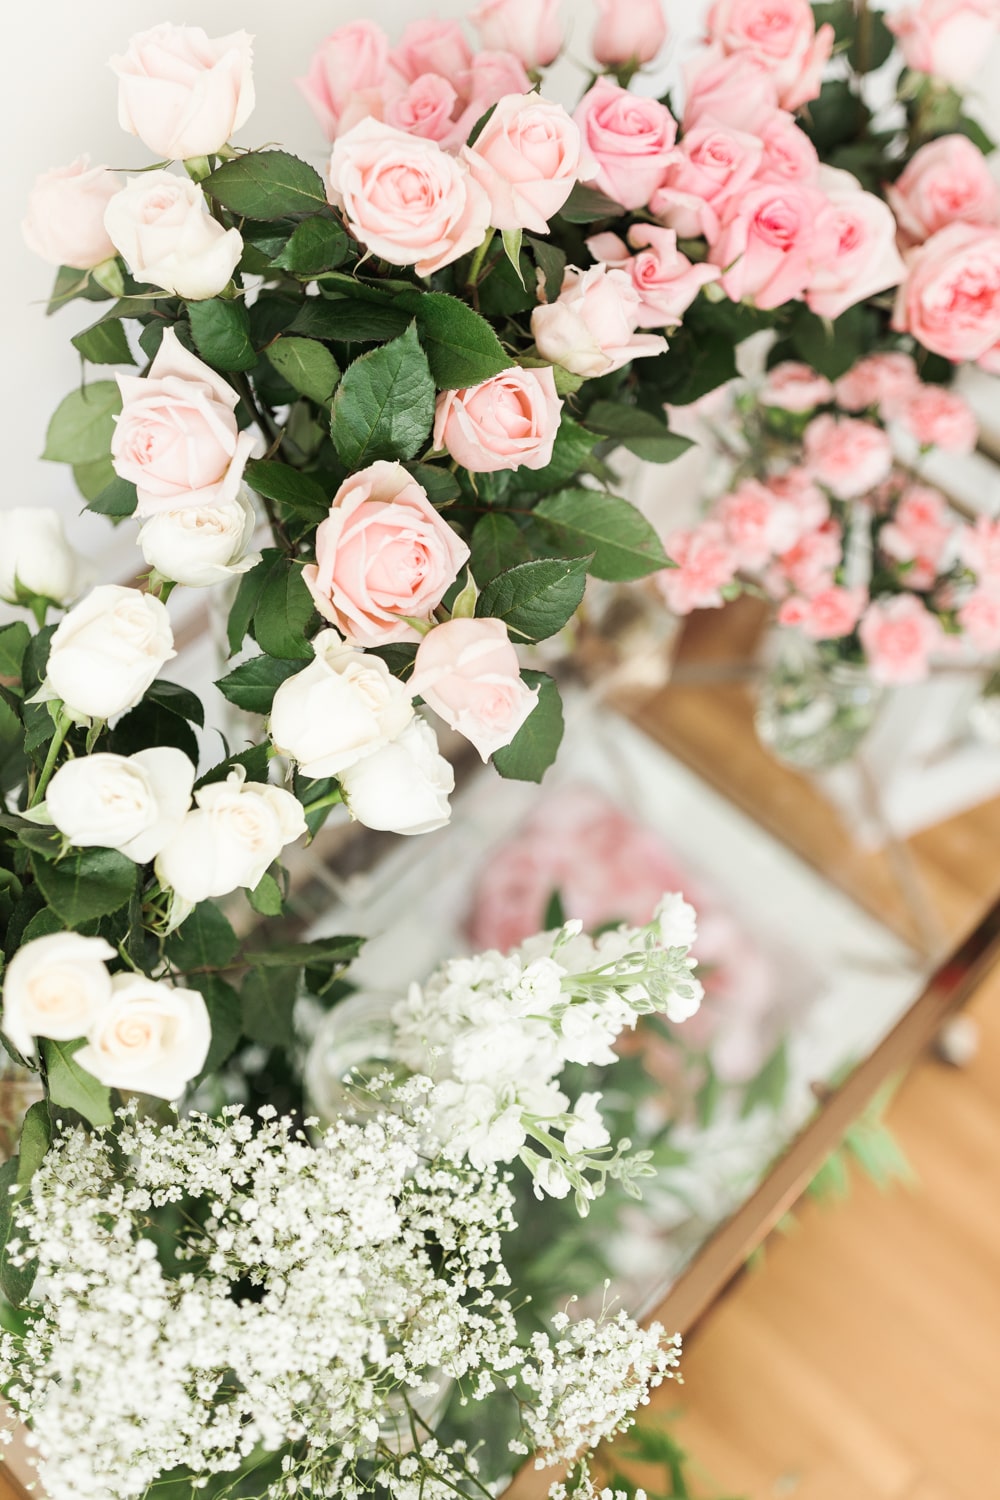 White and pink garden roses from Sam's Club on Diary of a Debutante